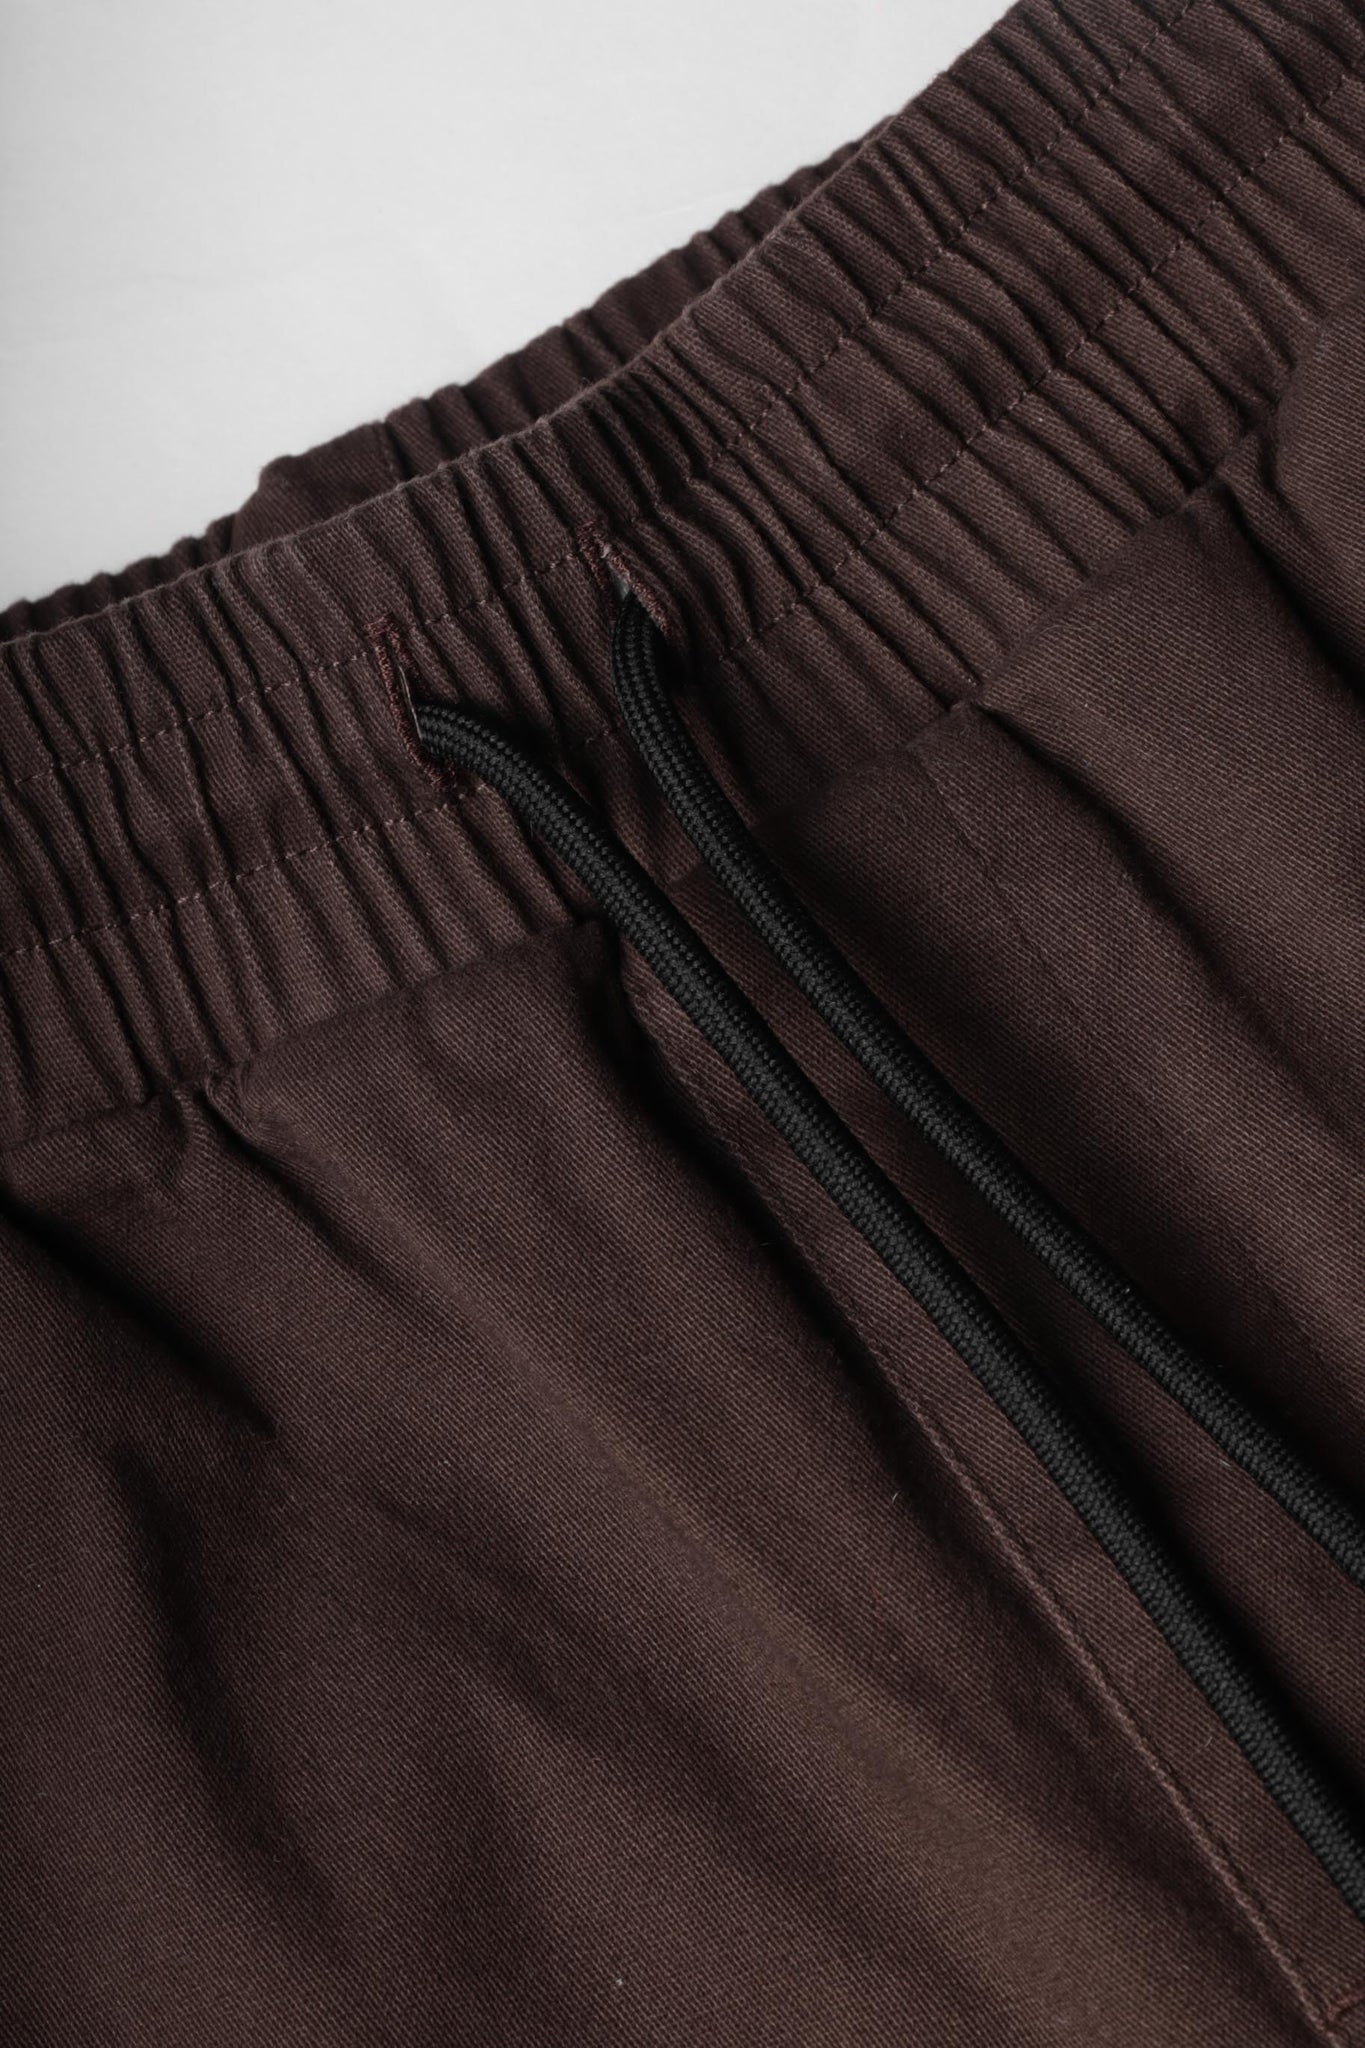 OBLIQUE BROWN CHINO PANT